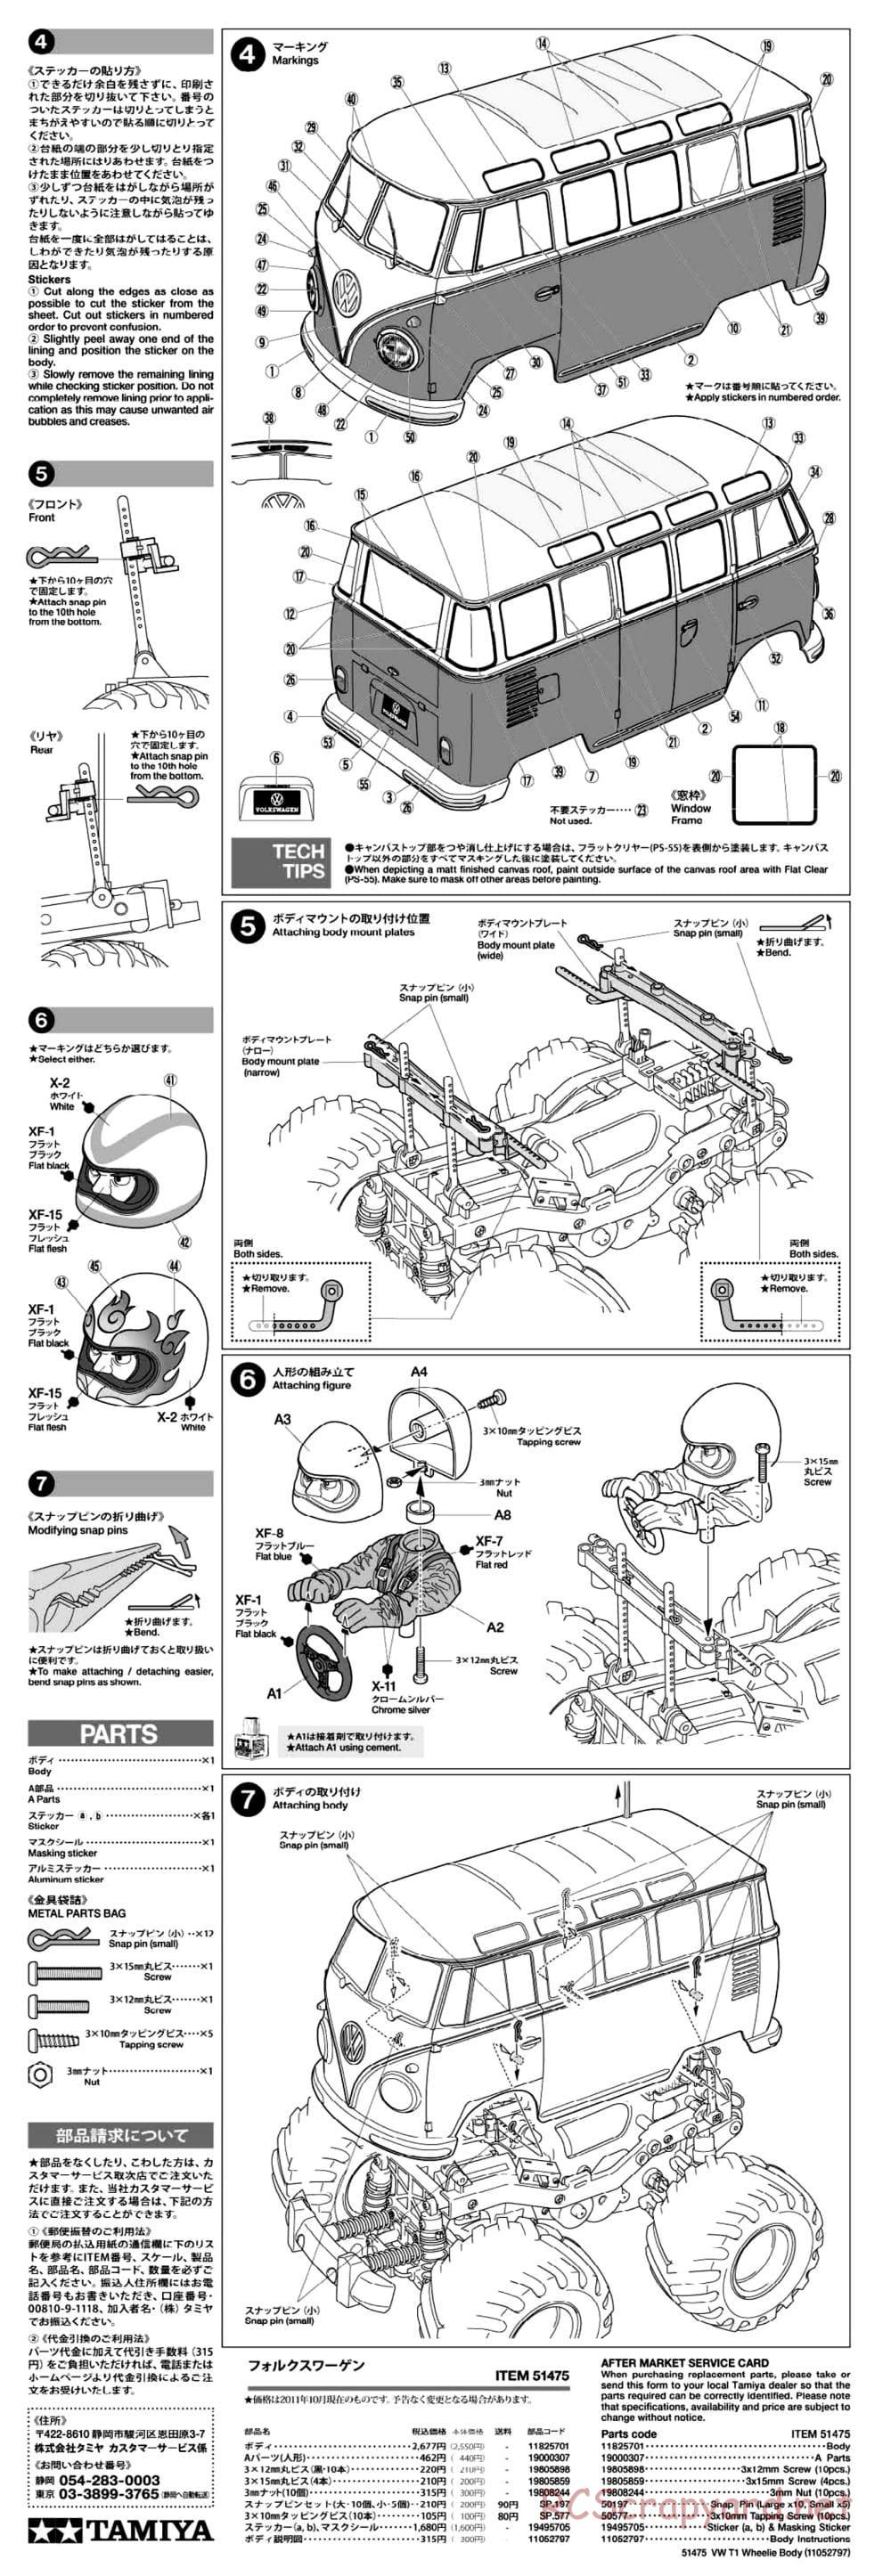 Tamiya - VW Type 2 Wheelie (T1) - WR-02 Chassis - Manual - Page 22